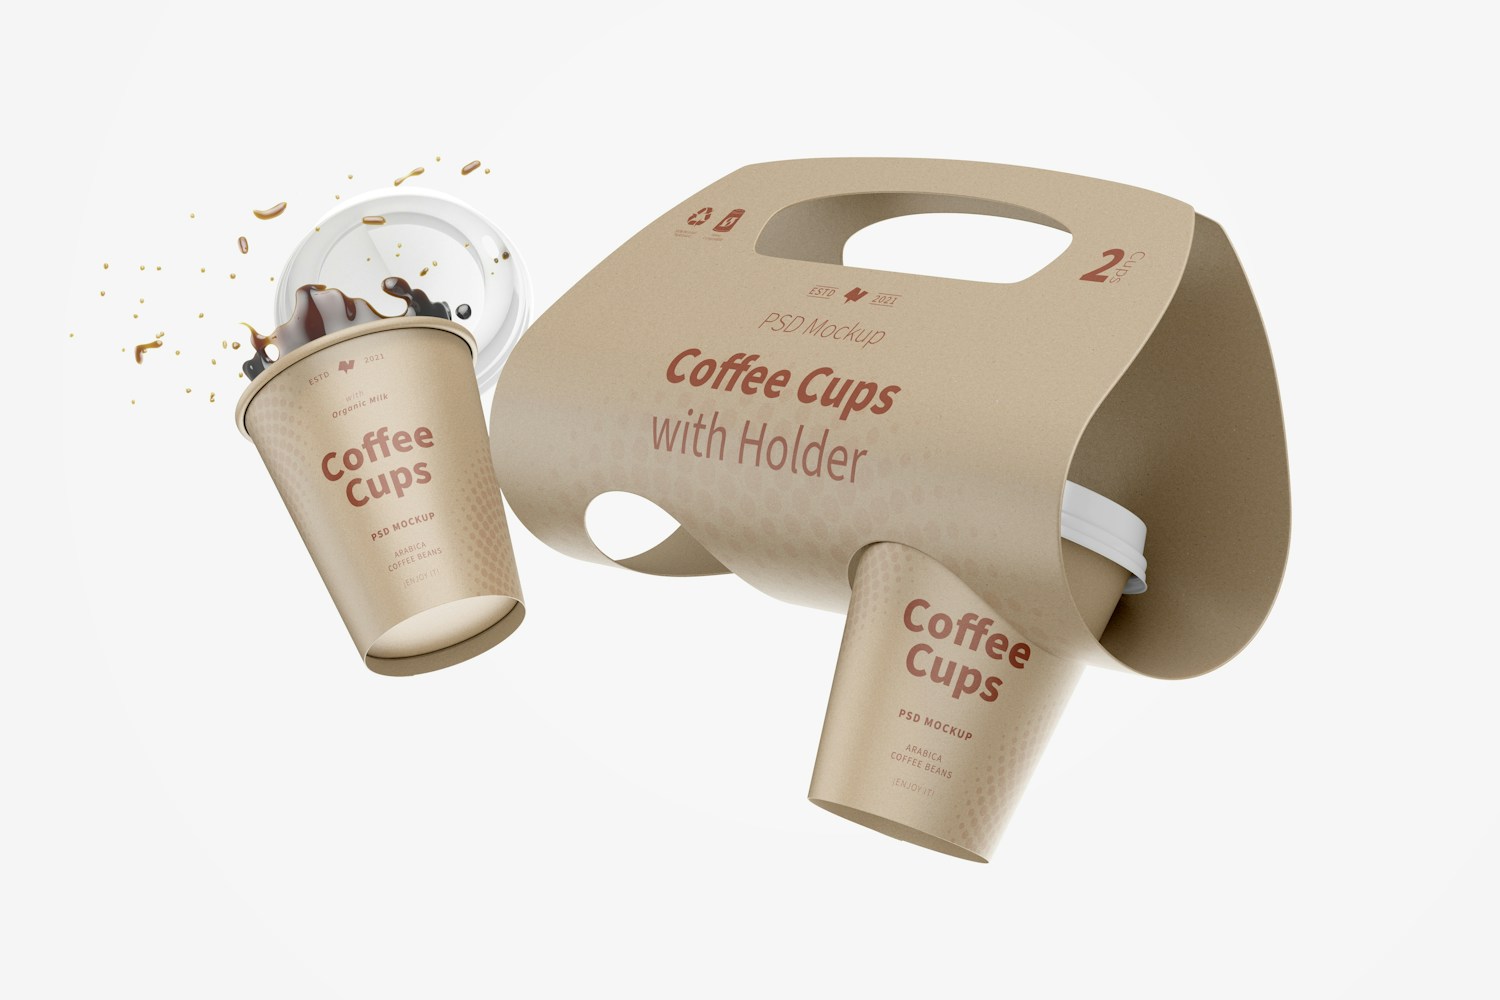 Coffee Cups with Holder Mockup, Floating